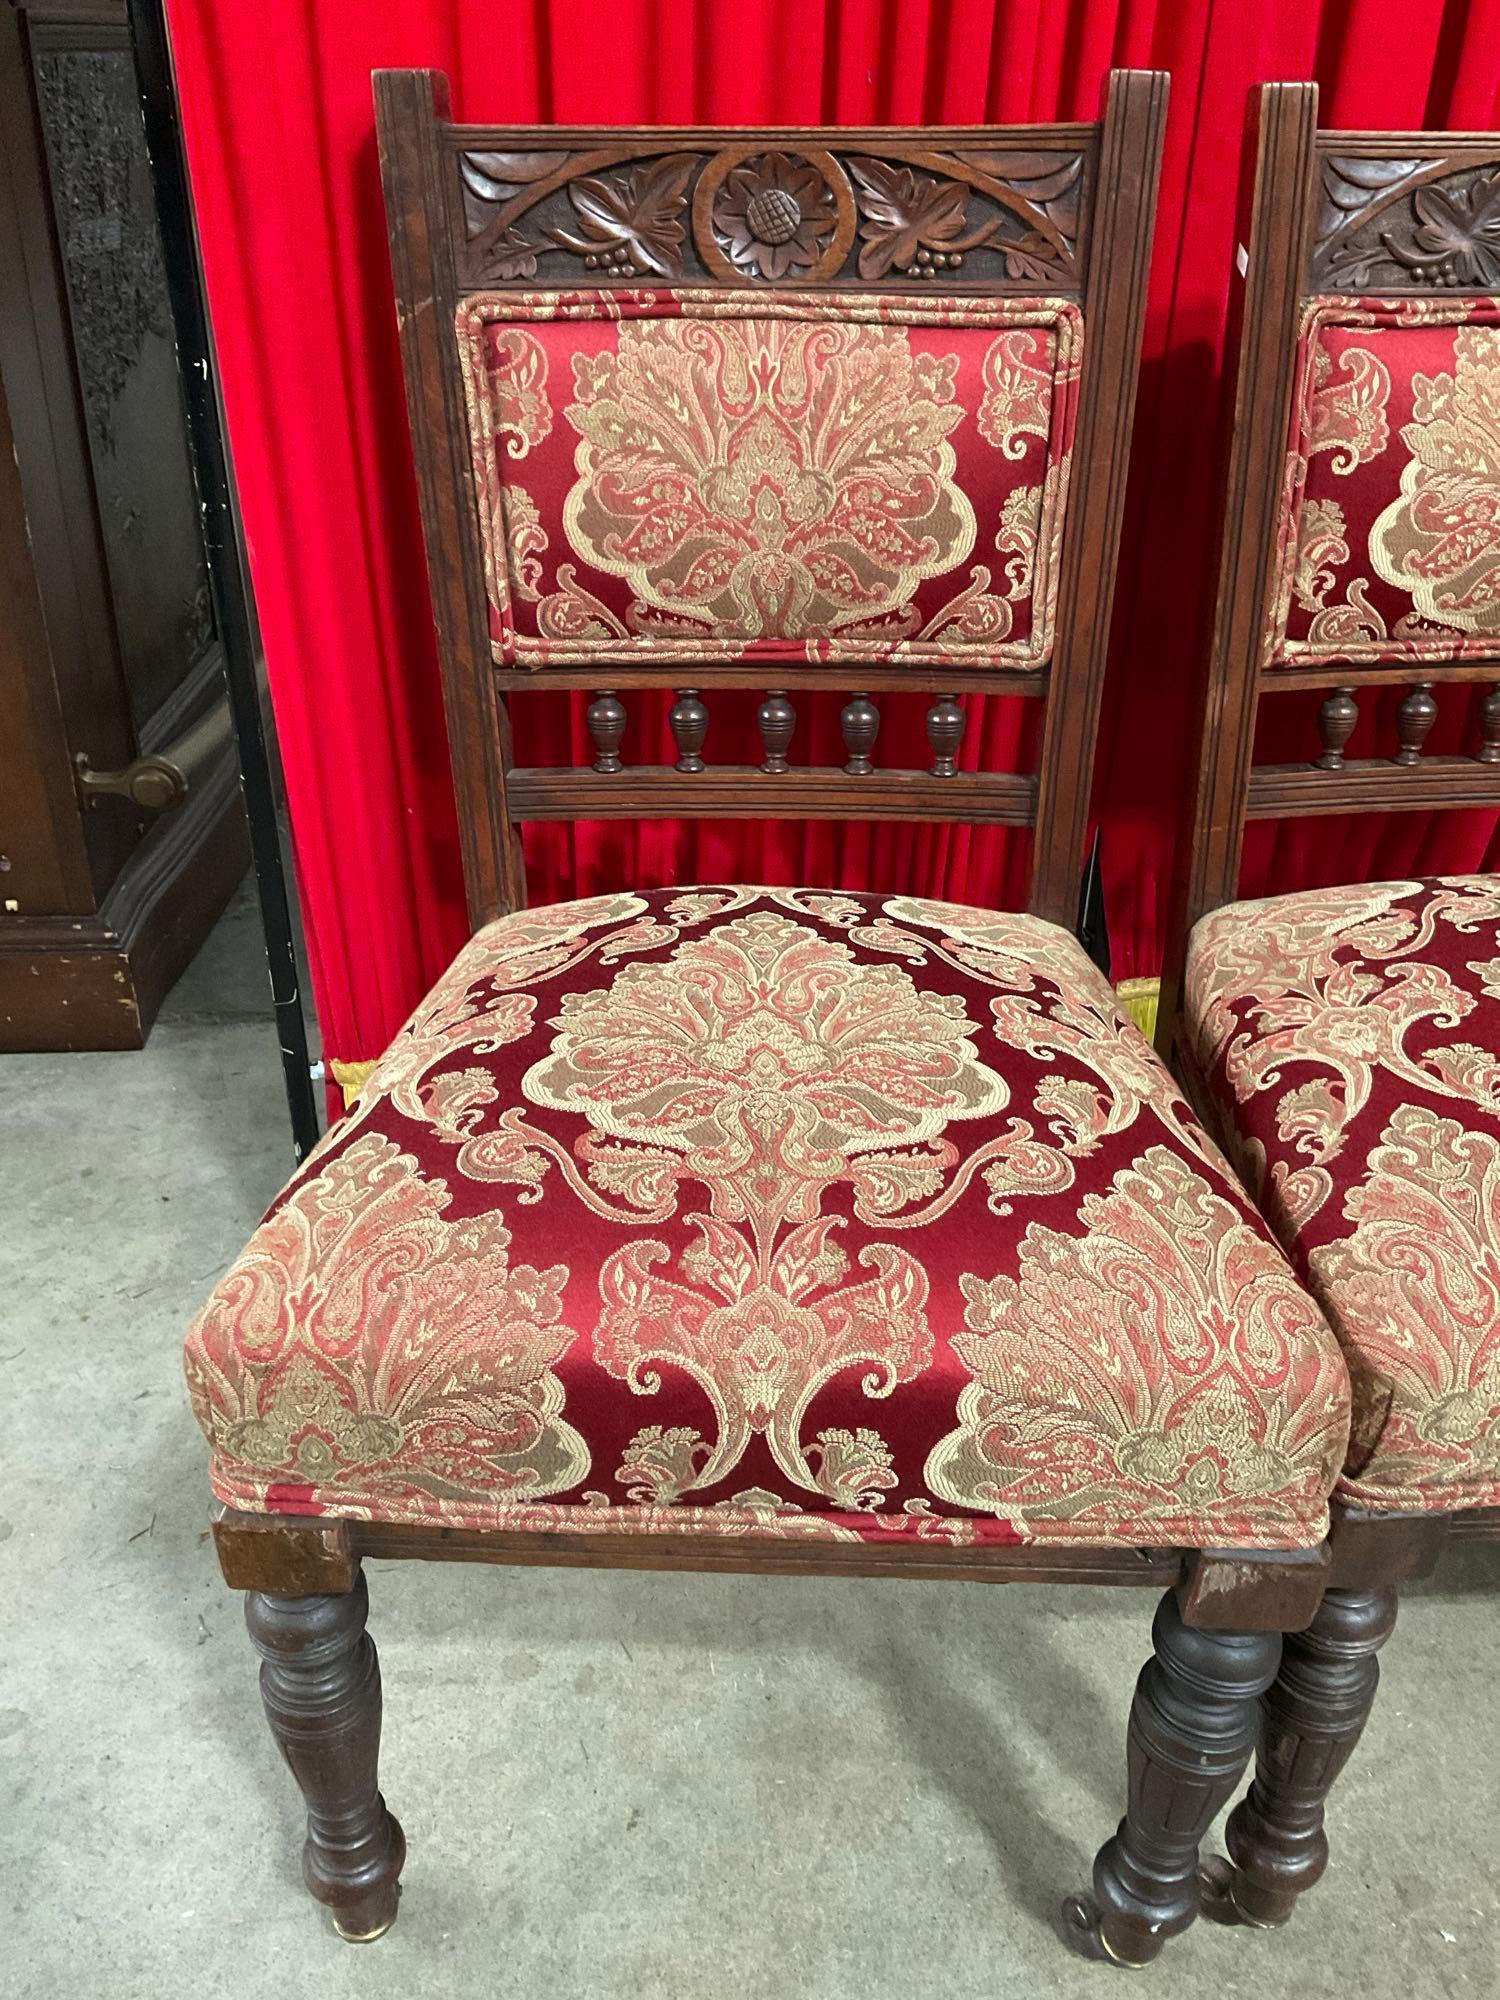 4 pcs Beautifully Carved Antique Wooden Stick & Ball Chairs w/ Red Paisley Upholstery. See pics.